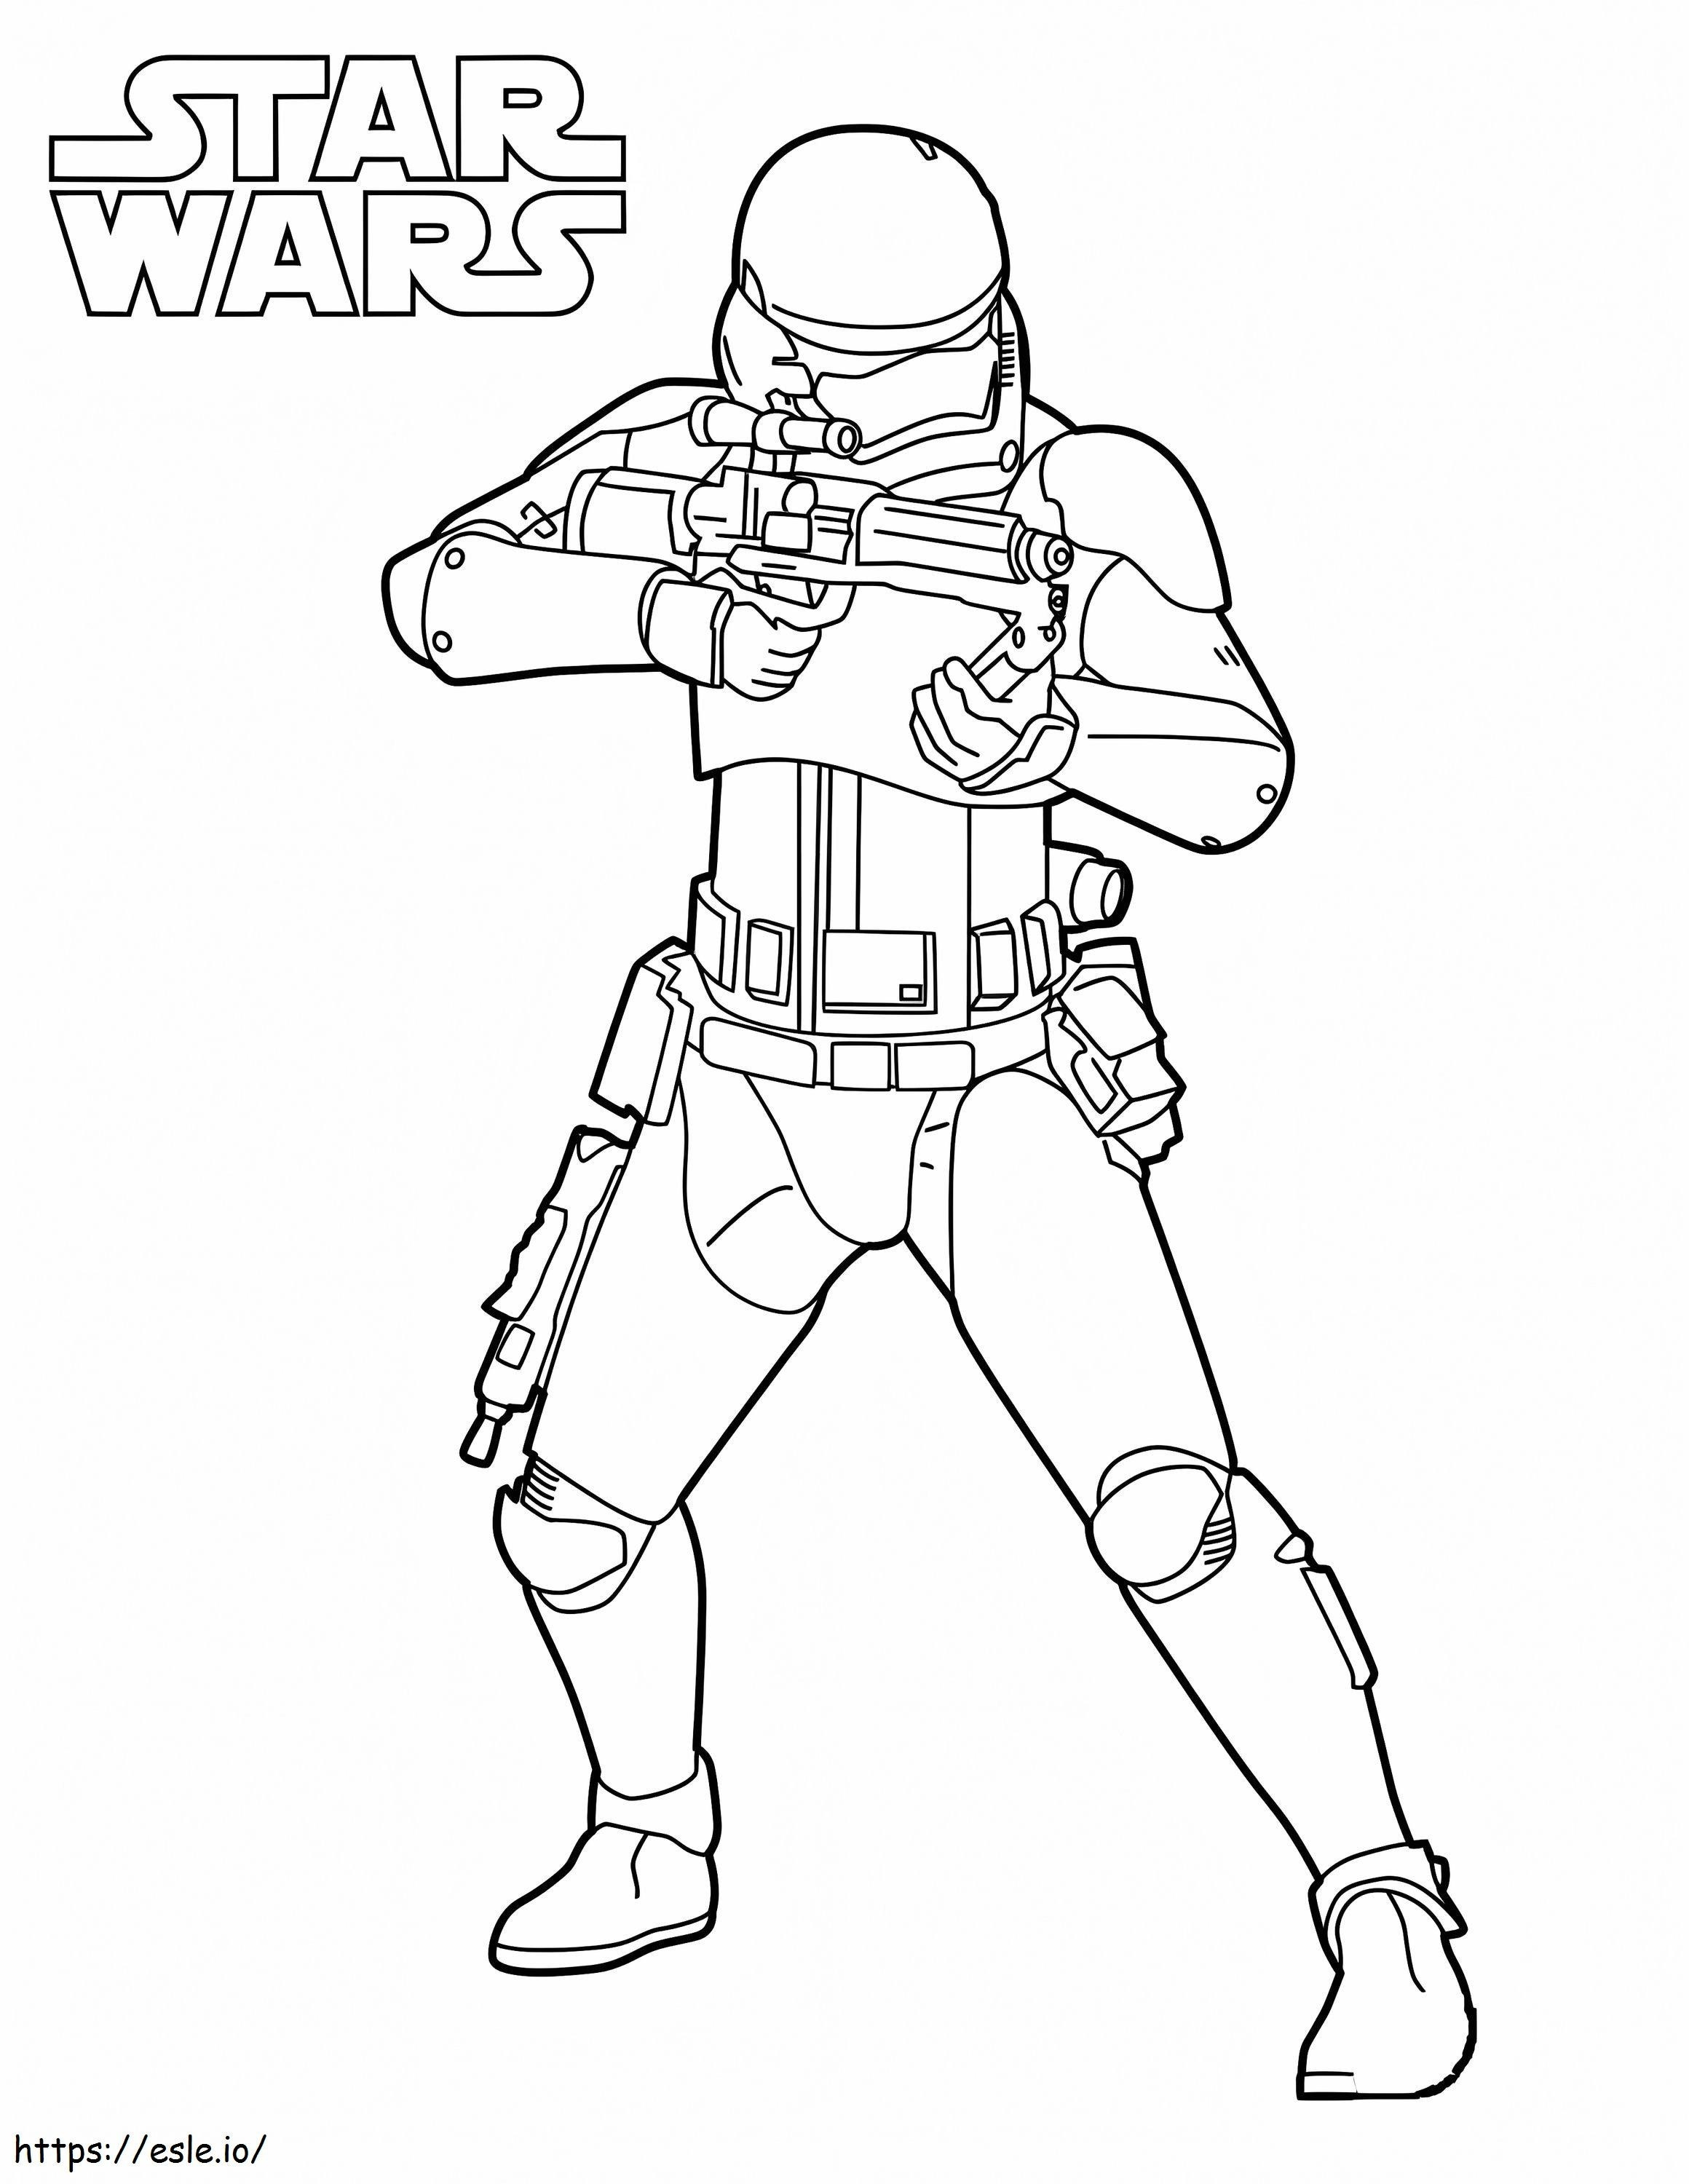 Star Wars Stormtrooper 792X1024 coloring page